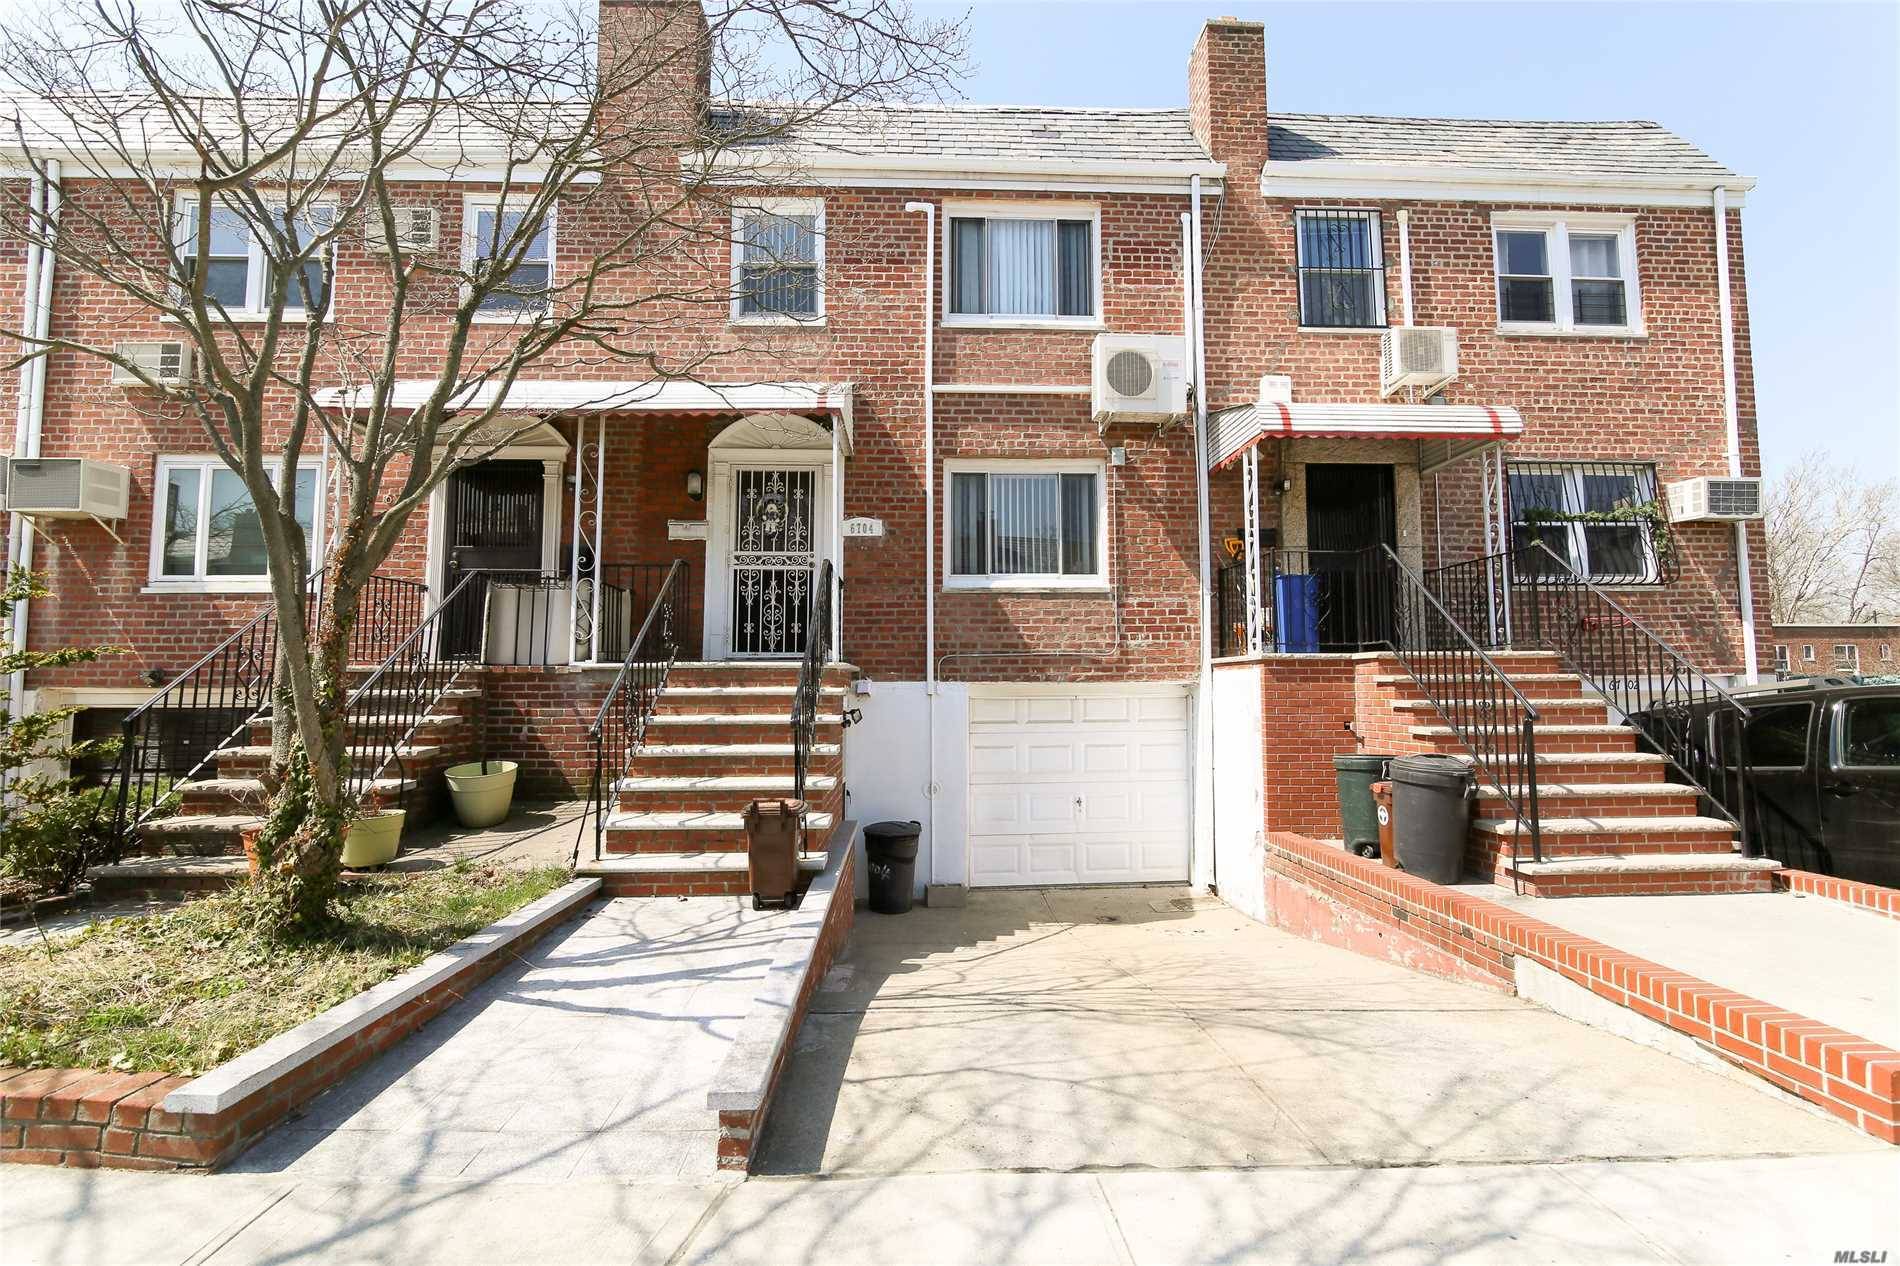 A Mint Condition 1 Family Brick Dwelling In Fresh Meadows Features A Lr/Dr.